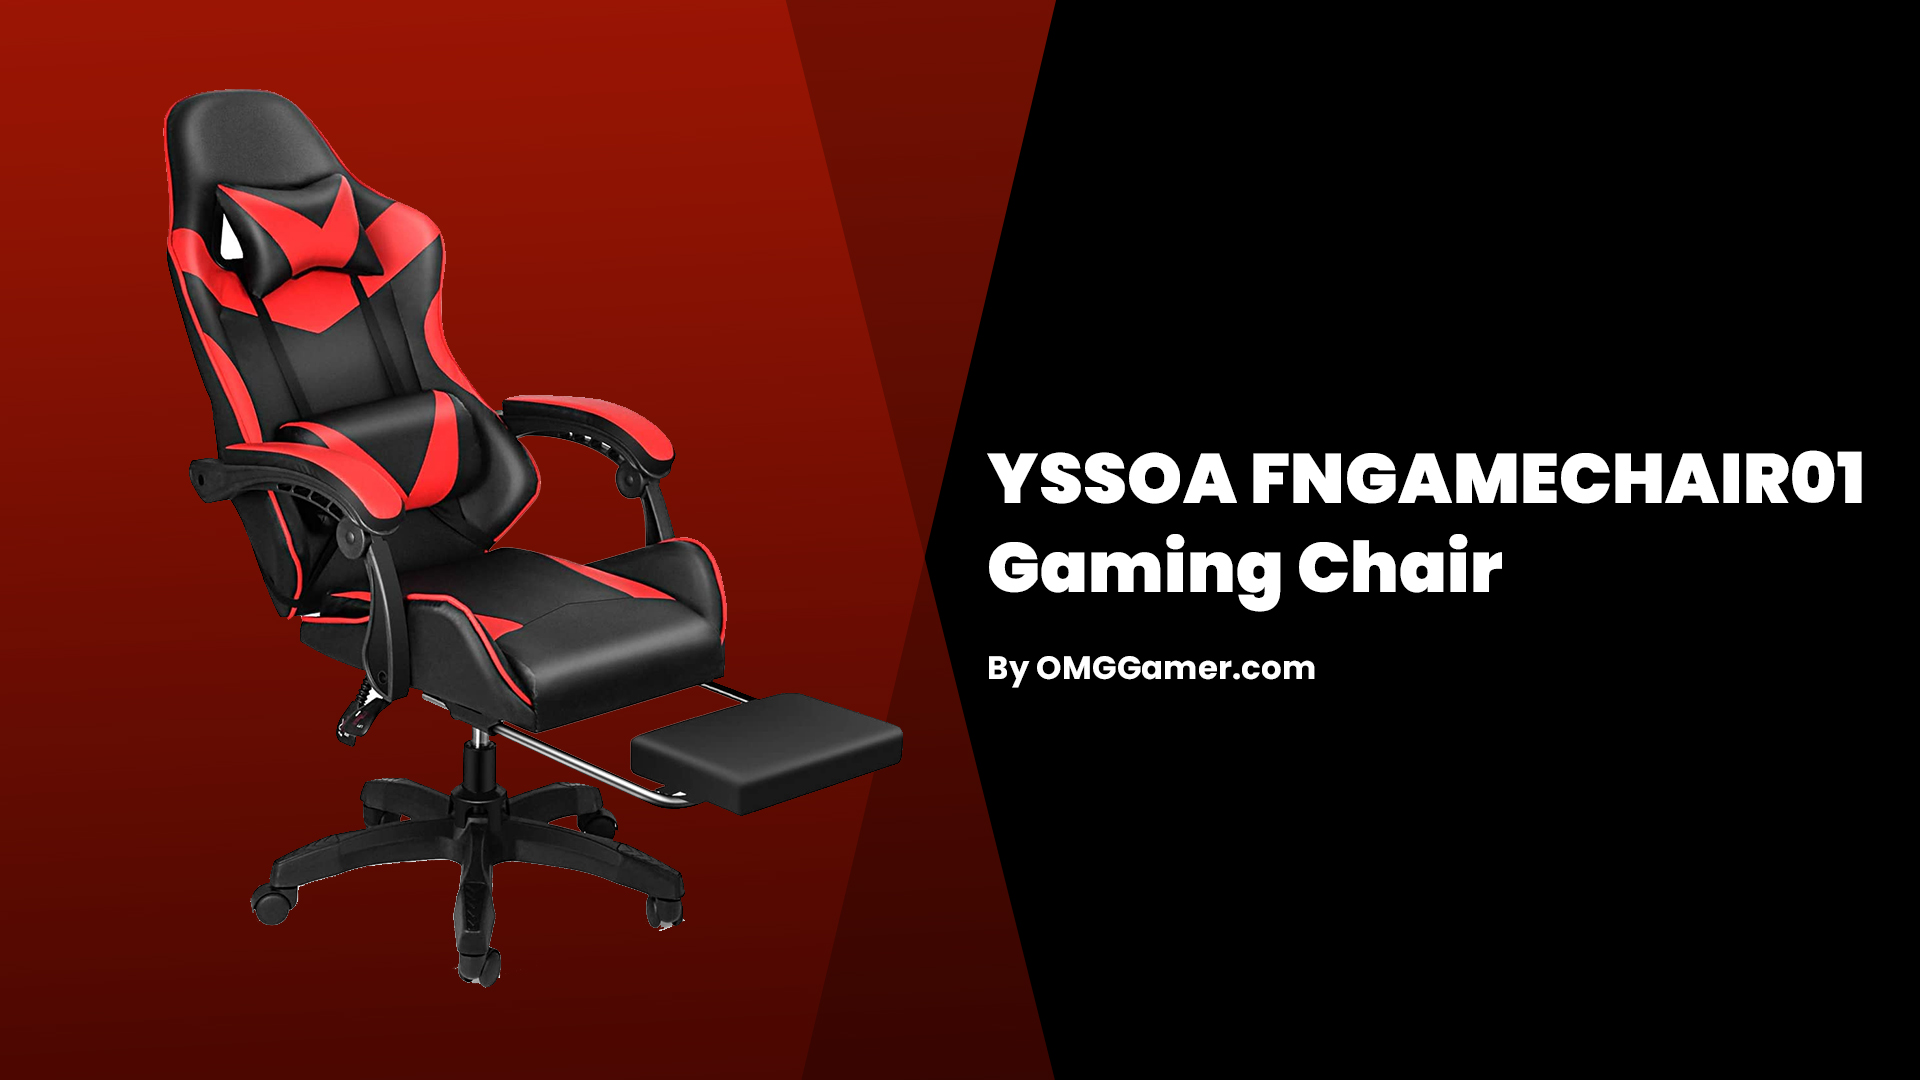 YSSOA FNGAMECHAIR01: Red and Black Gaming Chair